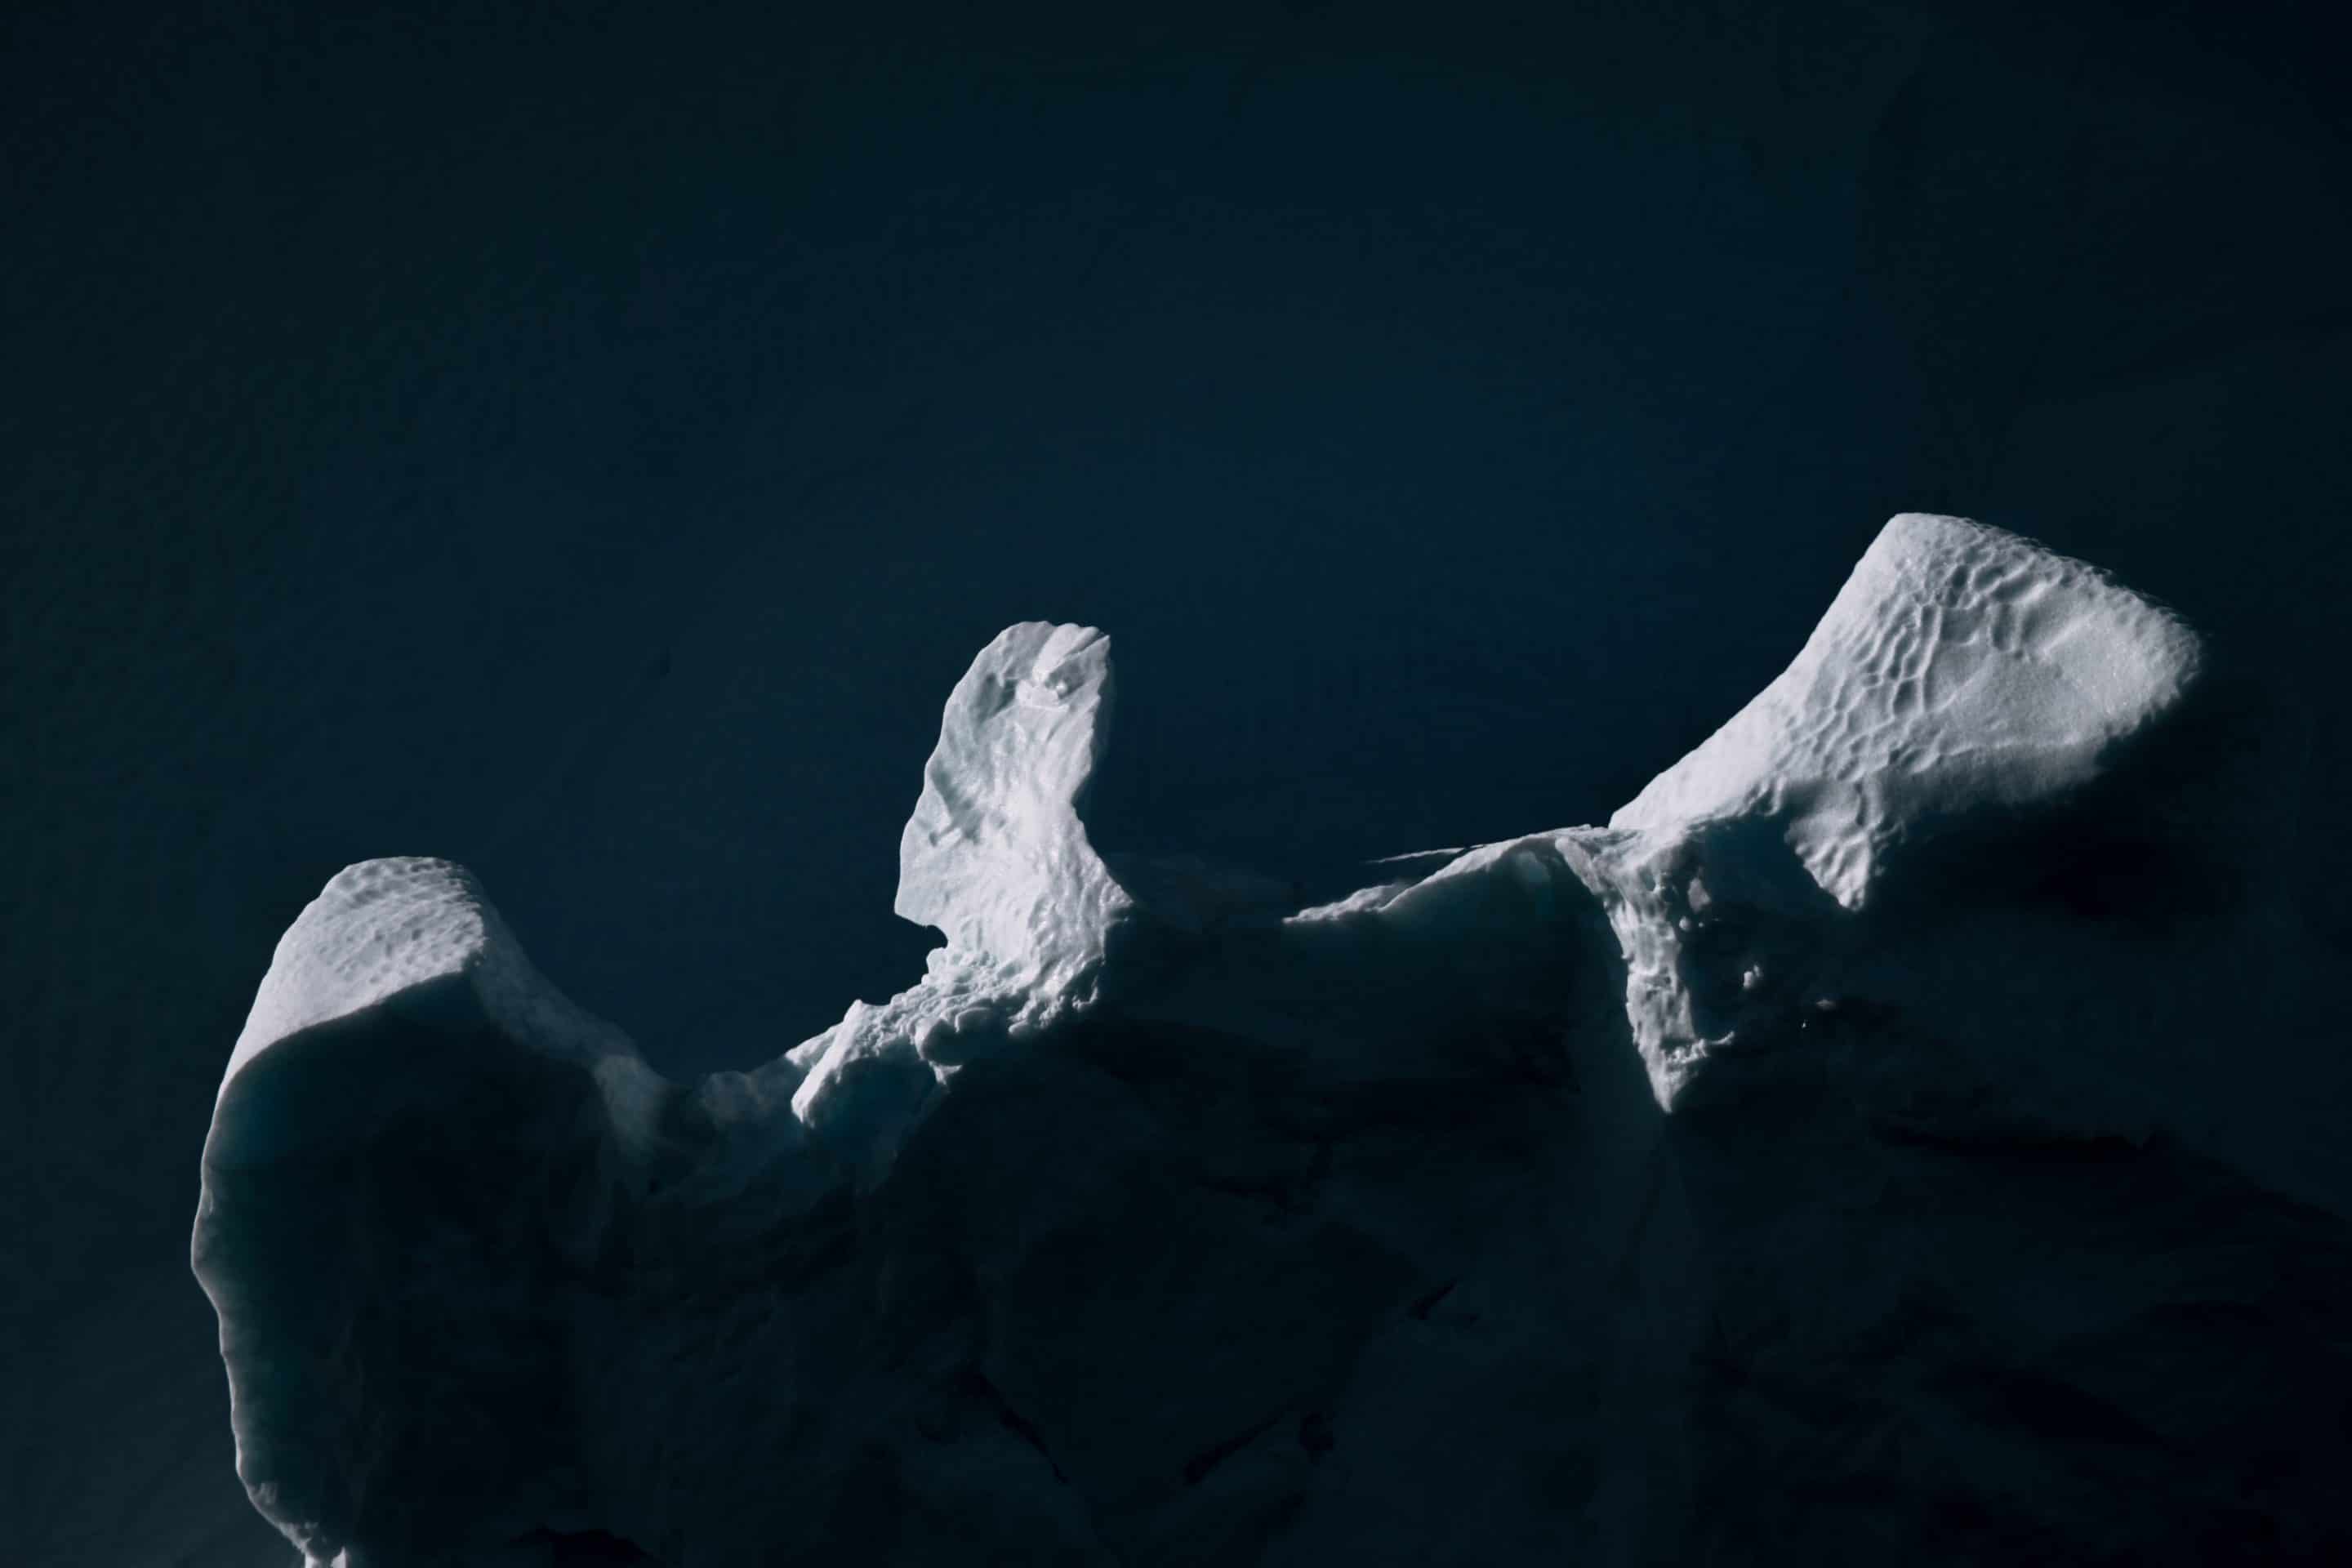 The endlessly complex landscape of abstract shapes and forms of icebergs in the Atlantic ocean at the west Greenland coast by Fine Art photographer Michael Schauer